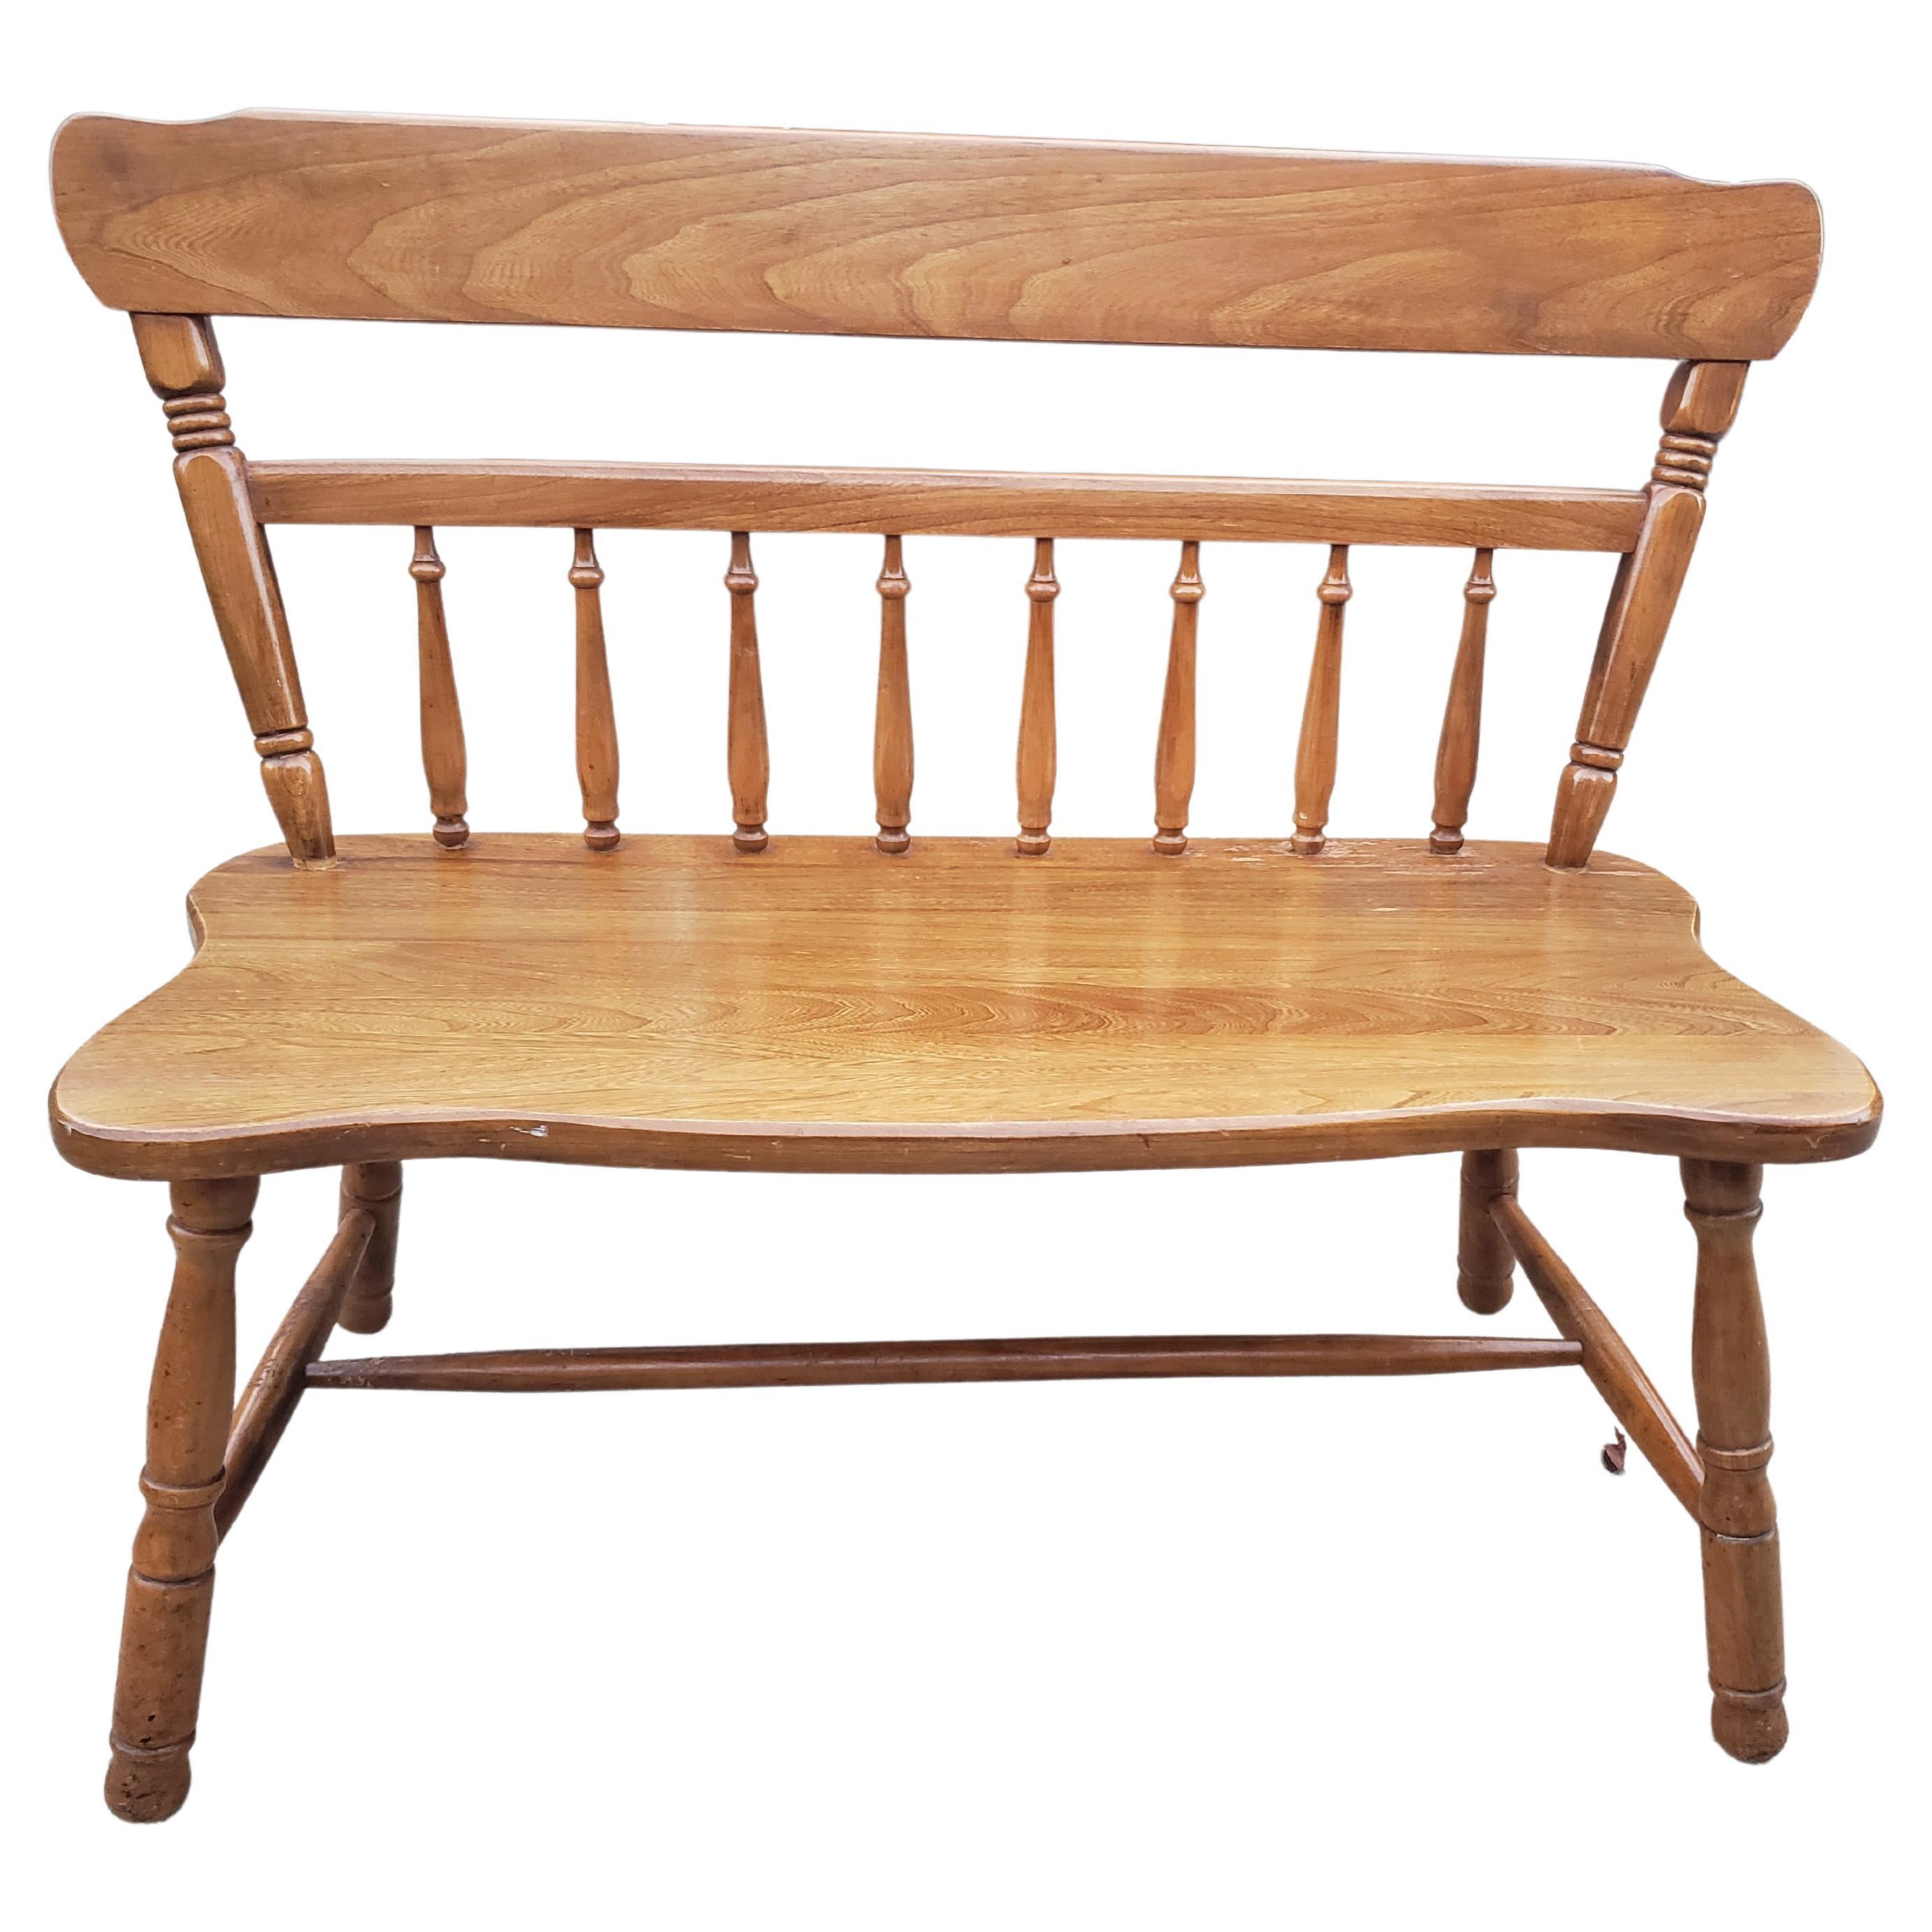 Solid Red Oak Farm House Style Two-Seat Bench Settee, Circa 1970s For Sale 2